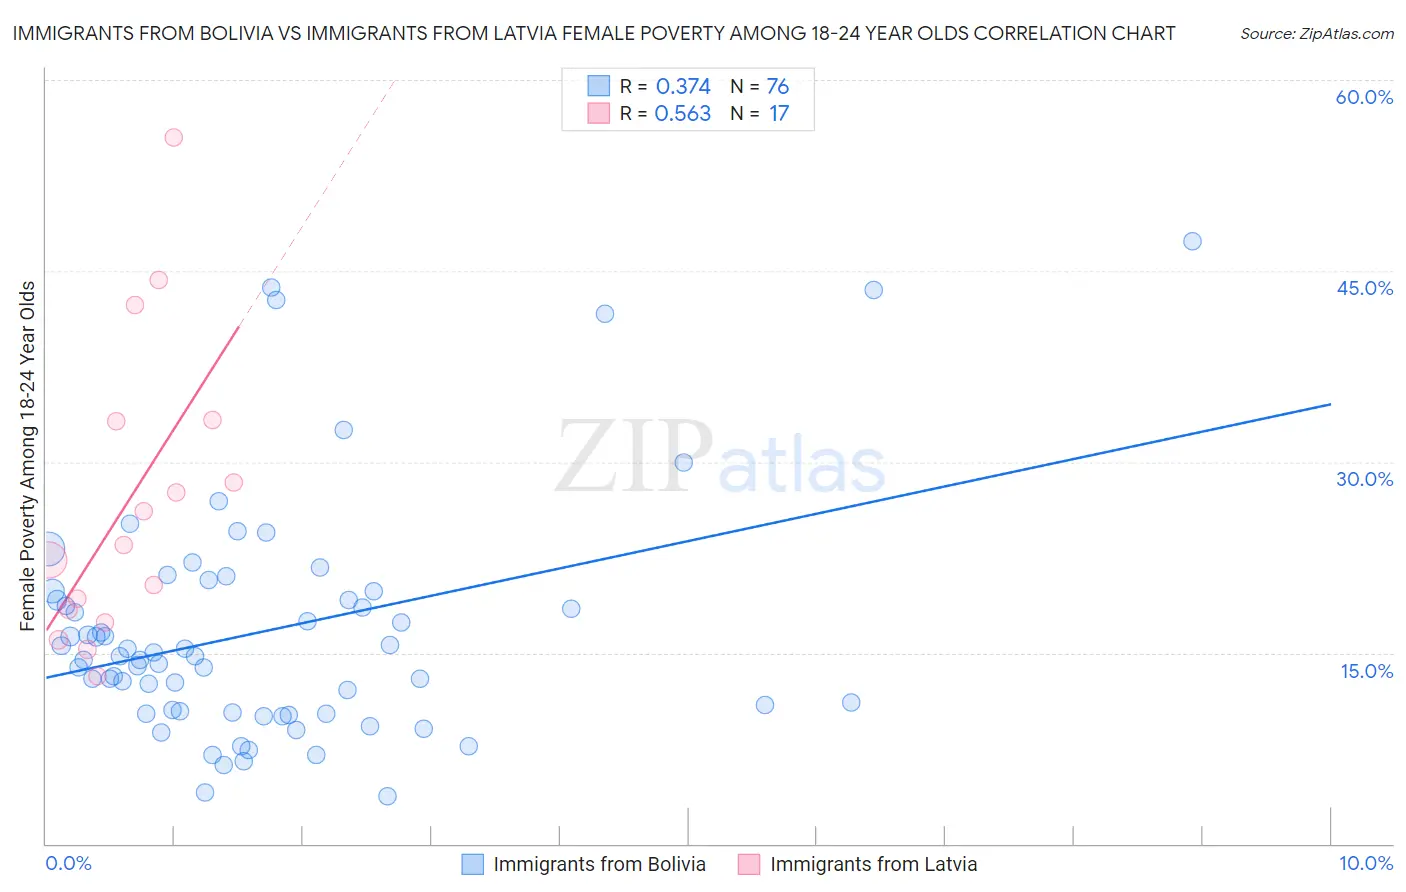 Immigrants from Bolivia vs Immigrants from Latvia Female Poverty Among 18-24 Year Olds